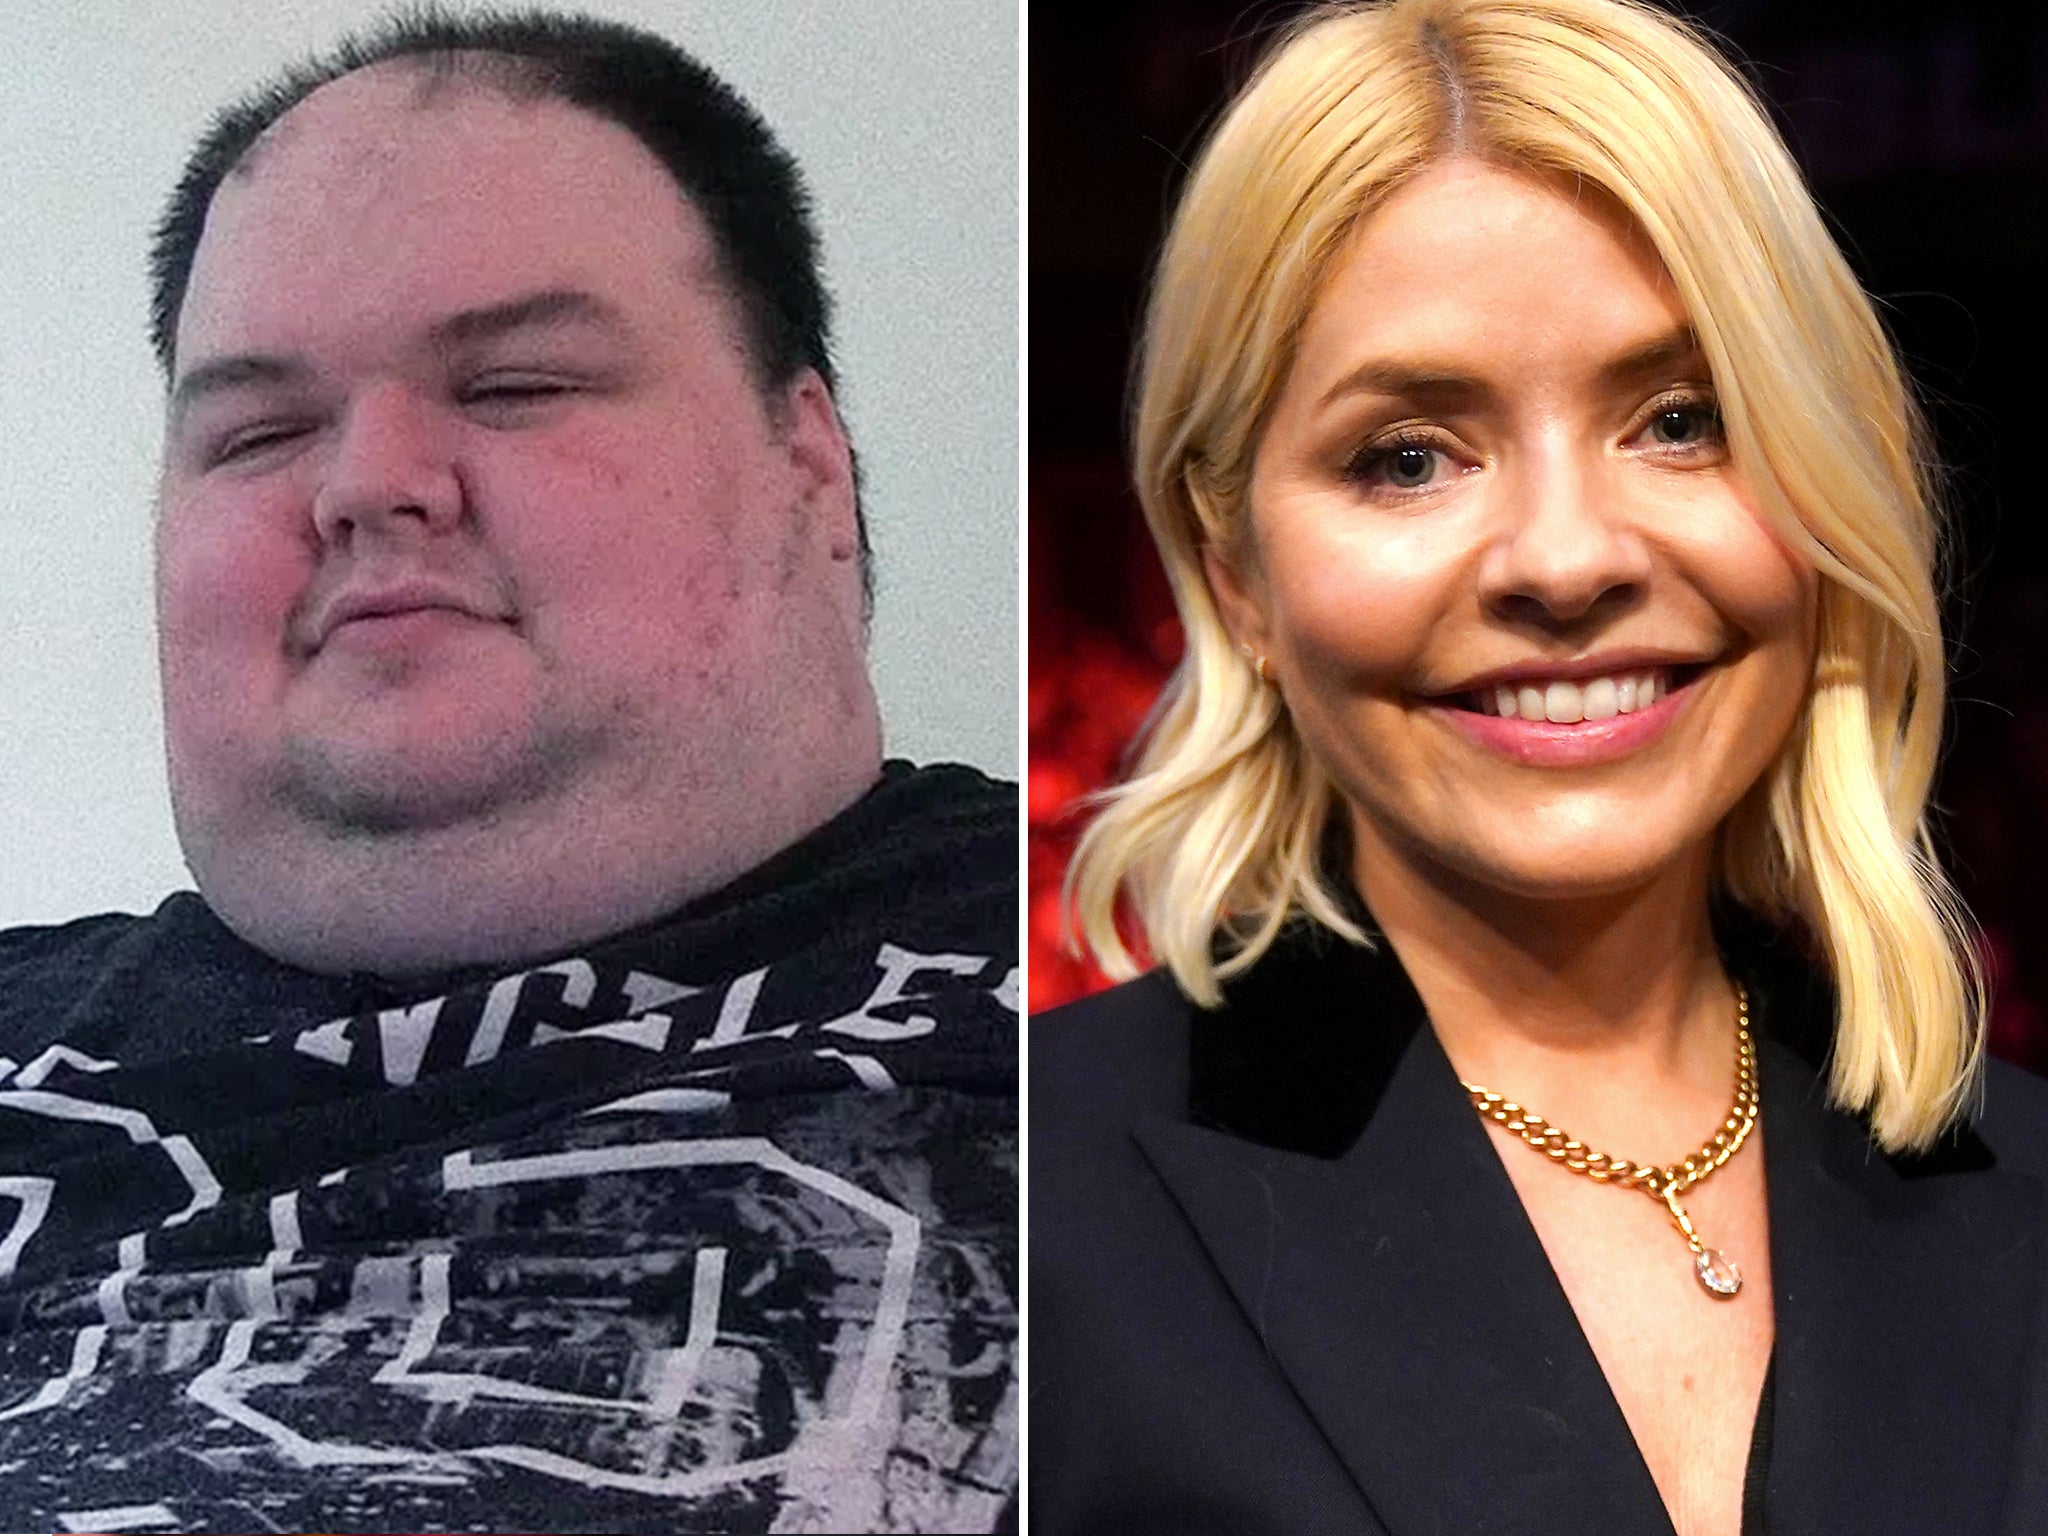 Holly Willoughby: Gavin Plumb had ‘ultimate fantasy’ of abducting TV host, court told